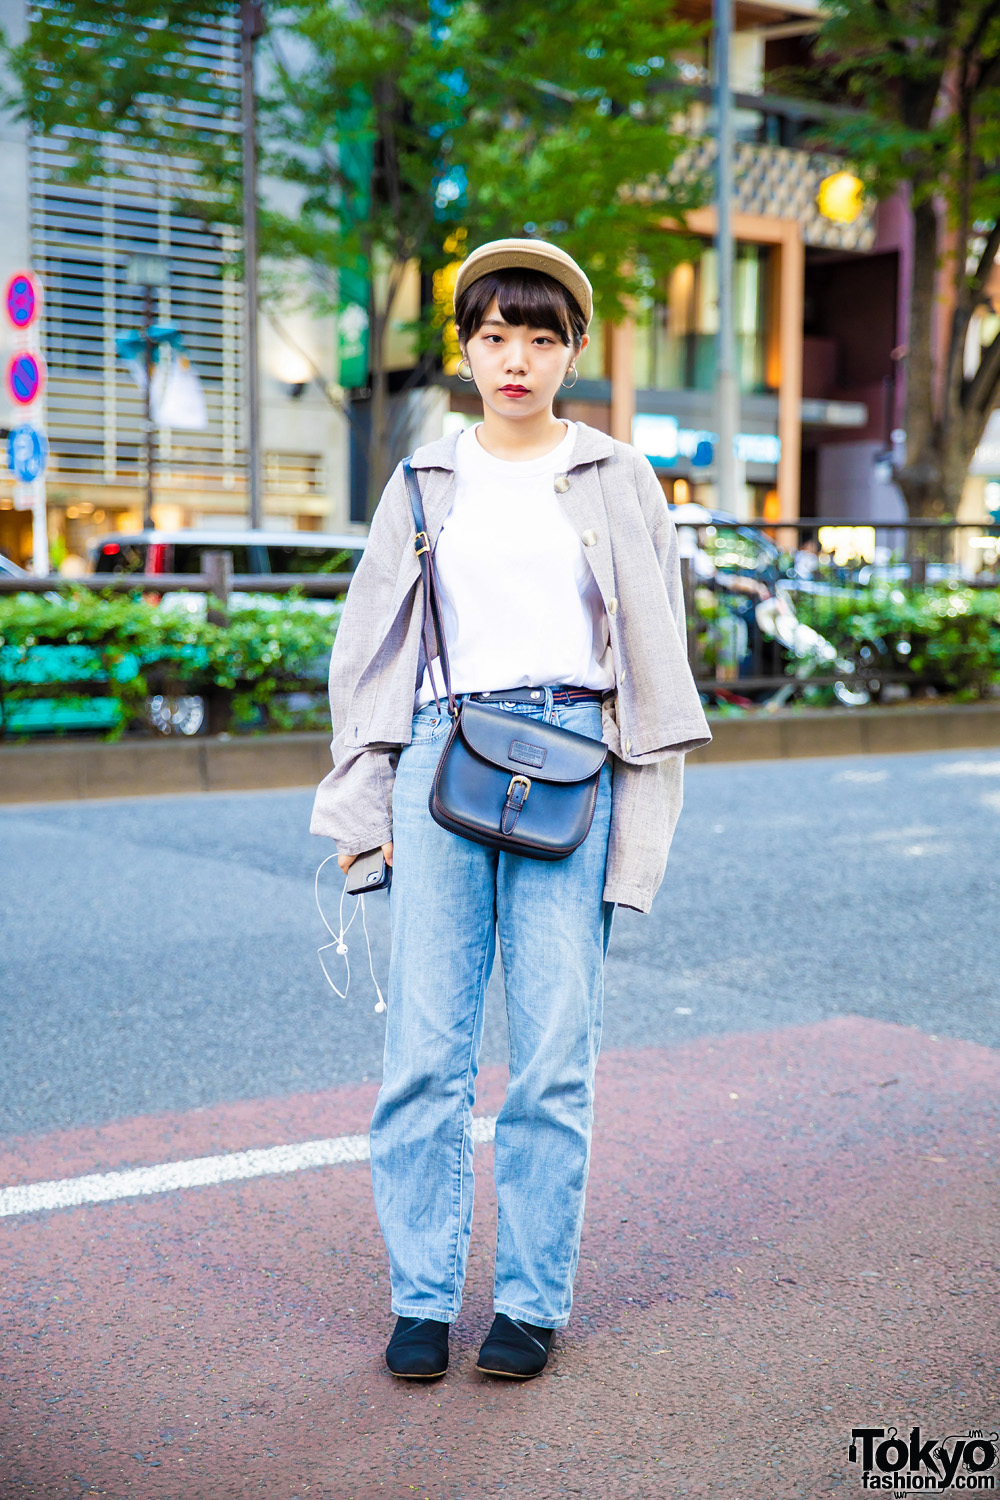 Casual UNIQLO Streetwear Style in Tokyo w/ Long Sleeved Linen Shirt, Suede Pumps, Leather Sling Bag & Kangol Newsboy Cap